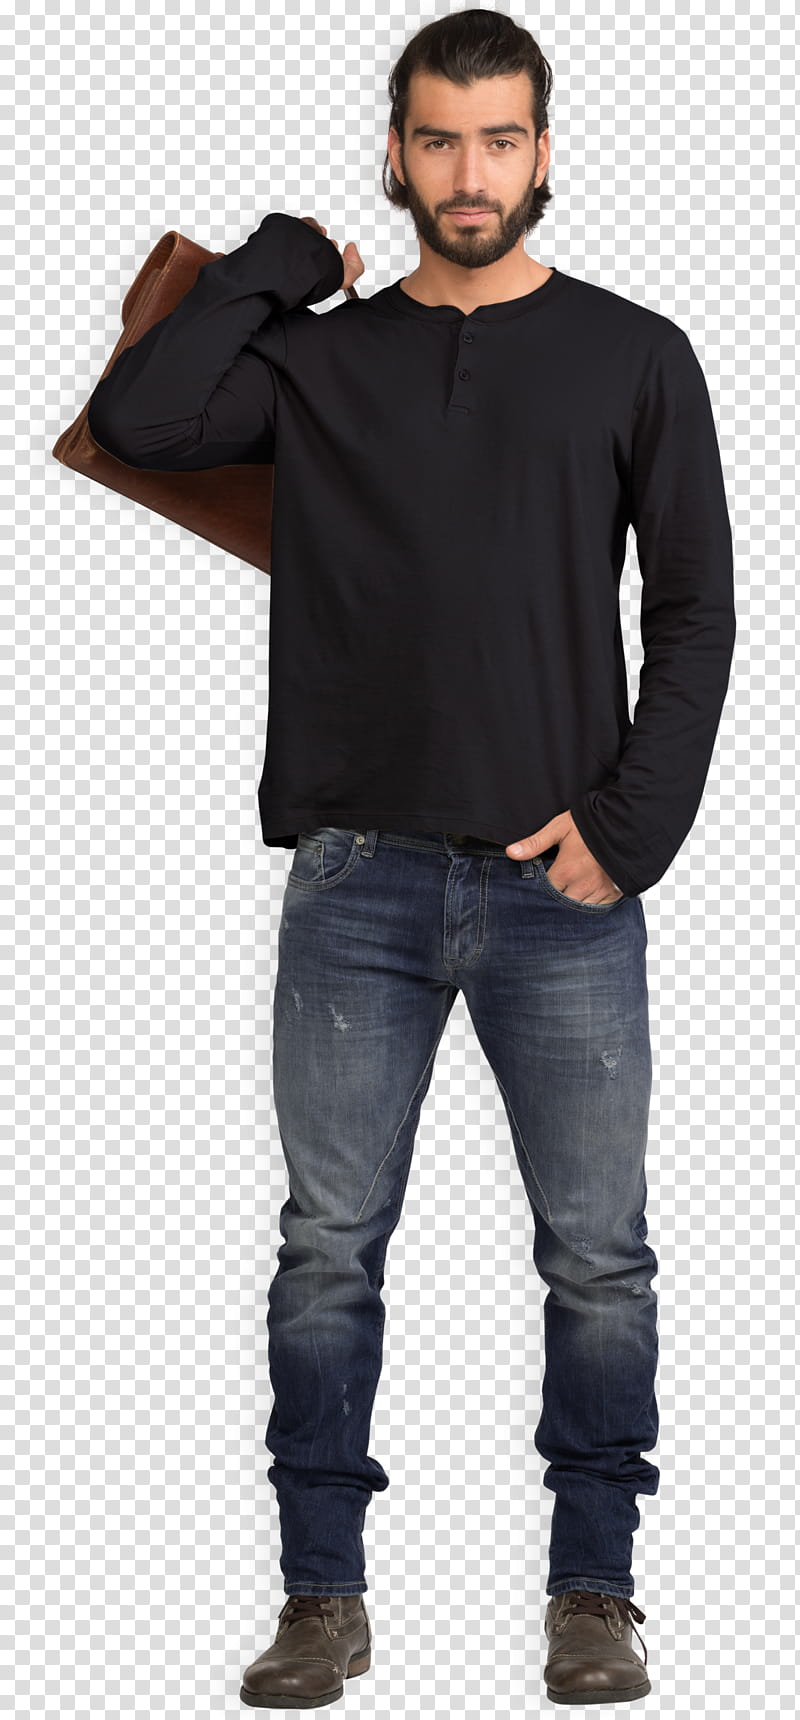 Man, Tshirt, Jeans, Henley Shirt, Longsleeved Tshirt, Top, Sweater, Cotton transparent background PNG clipart